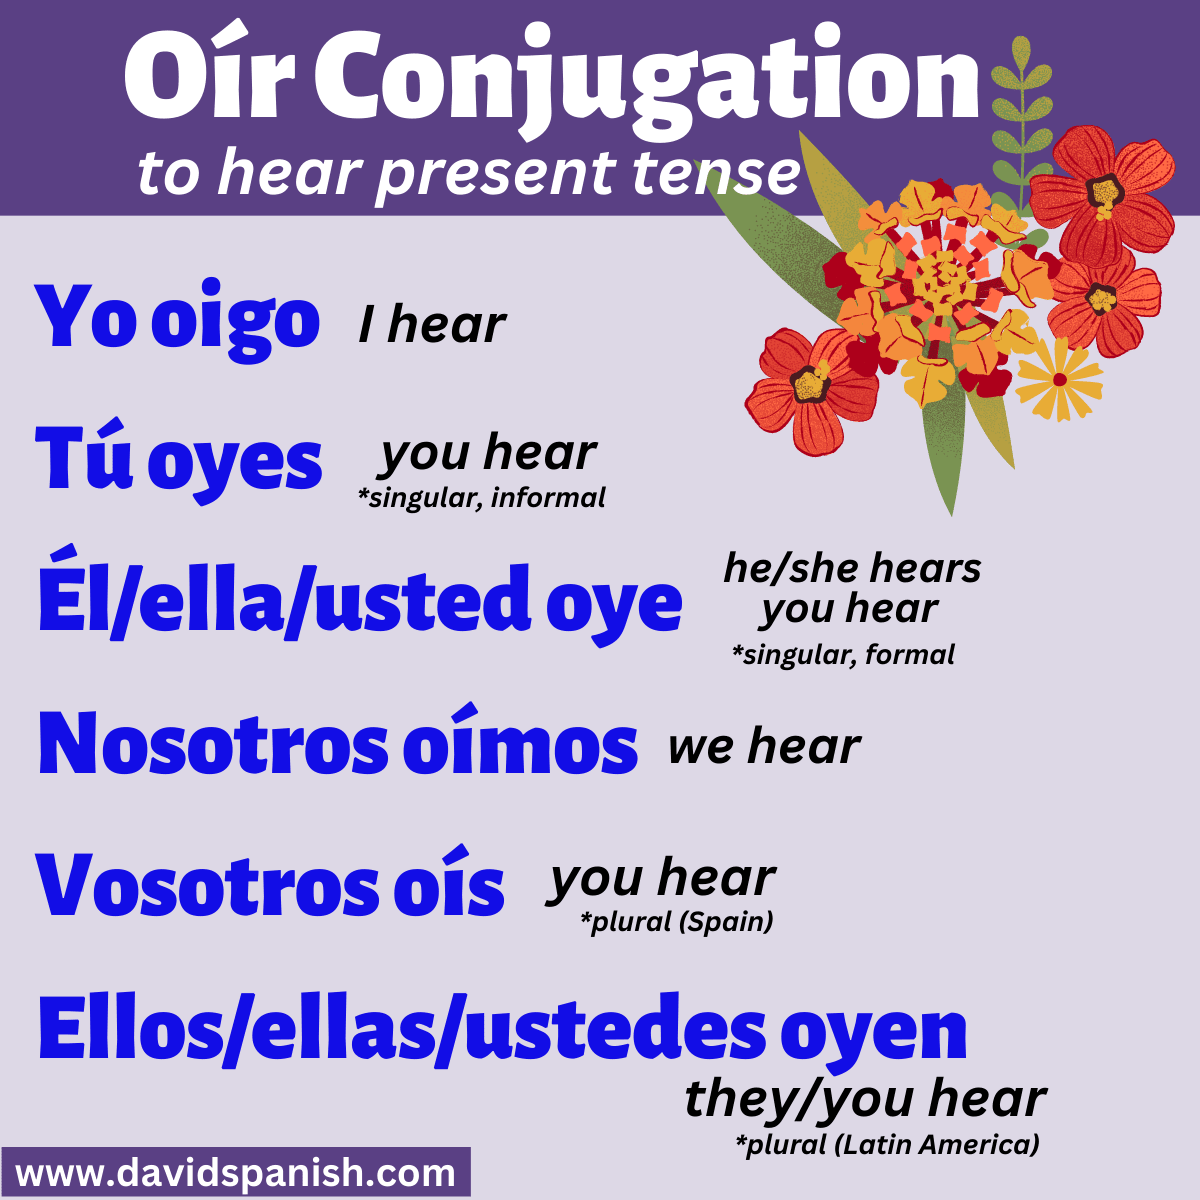 Oír (to hear) conjugation in the present tense.